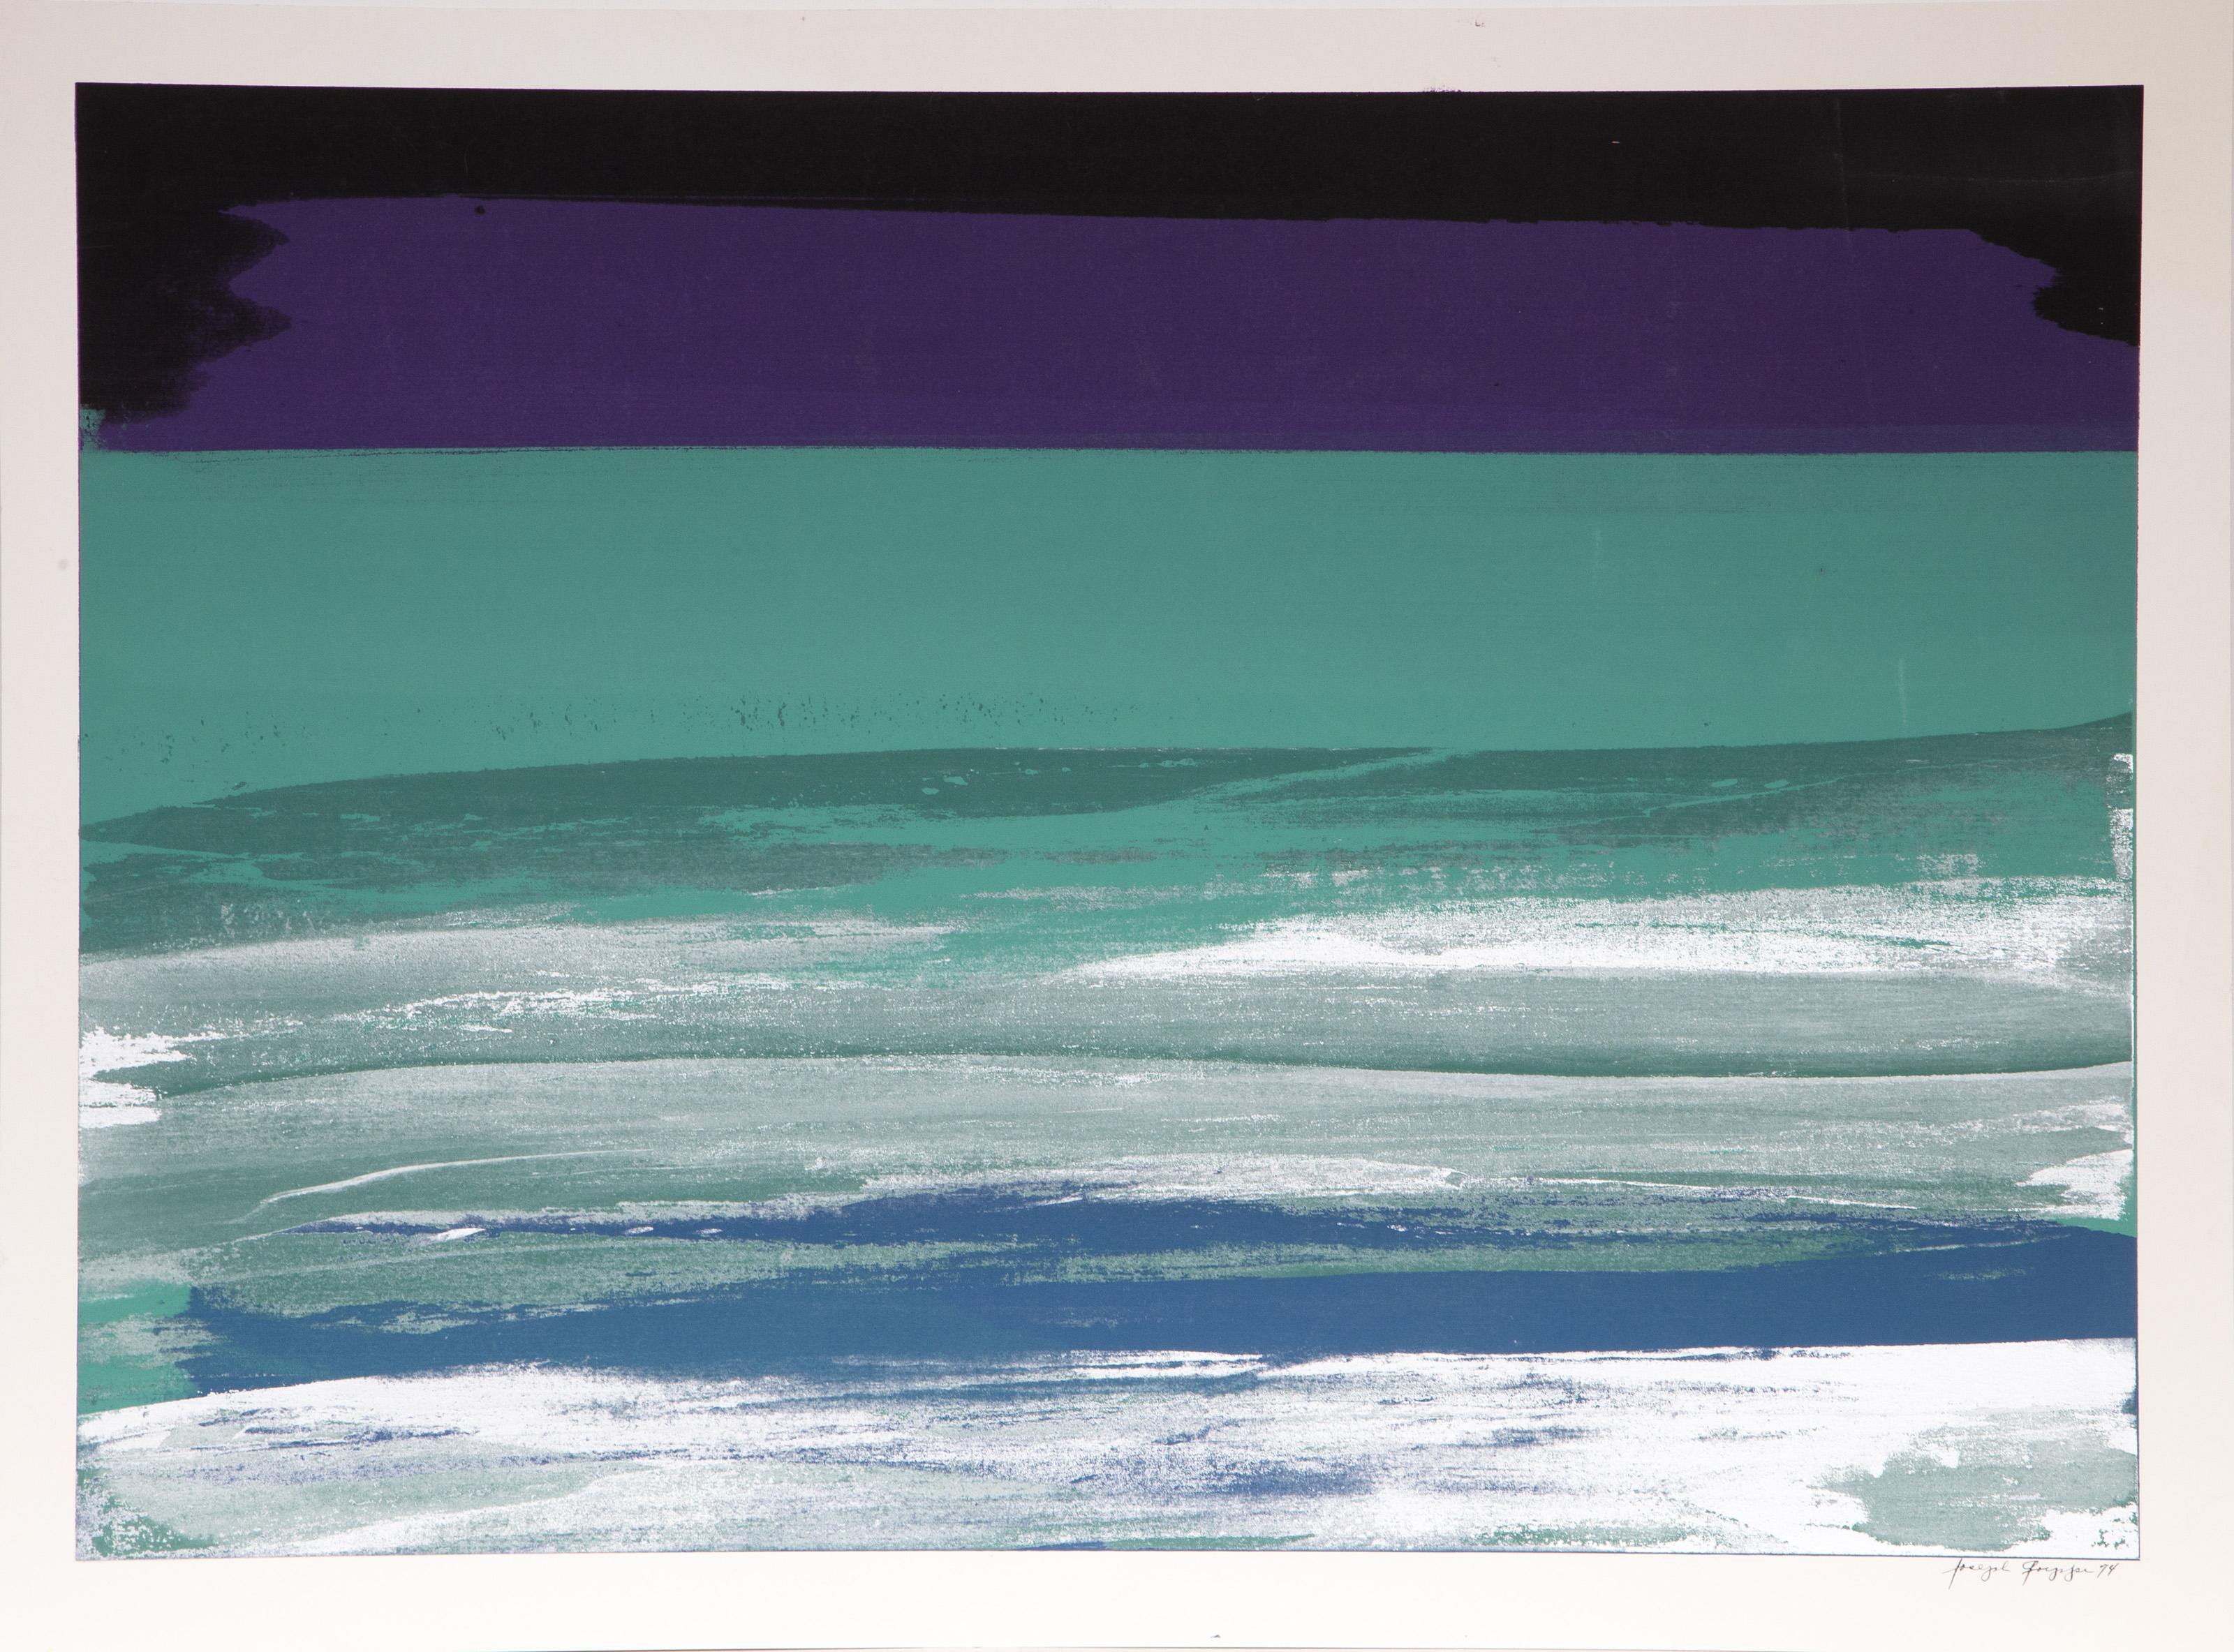 Seascape in Blue, Grey, Green and Purple
Joseph Grippi, American (1924–2001)
Date: 1974
Screenprint, signed and dated in pencil
Image Size: 28 x 39 inches
Size: 31.5 x 42 in. (80.01 x 106.68 cm)